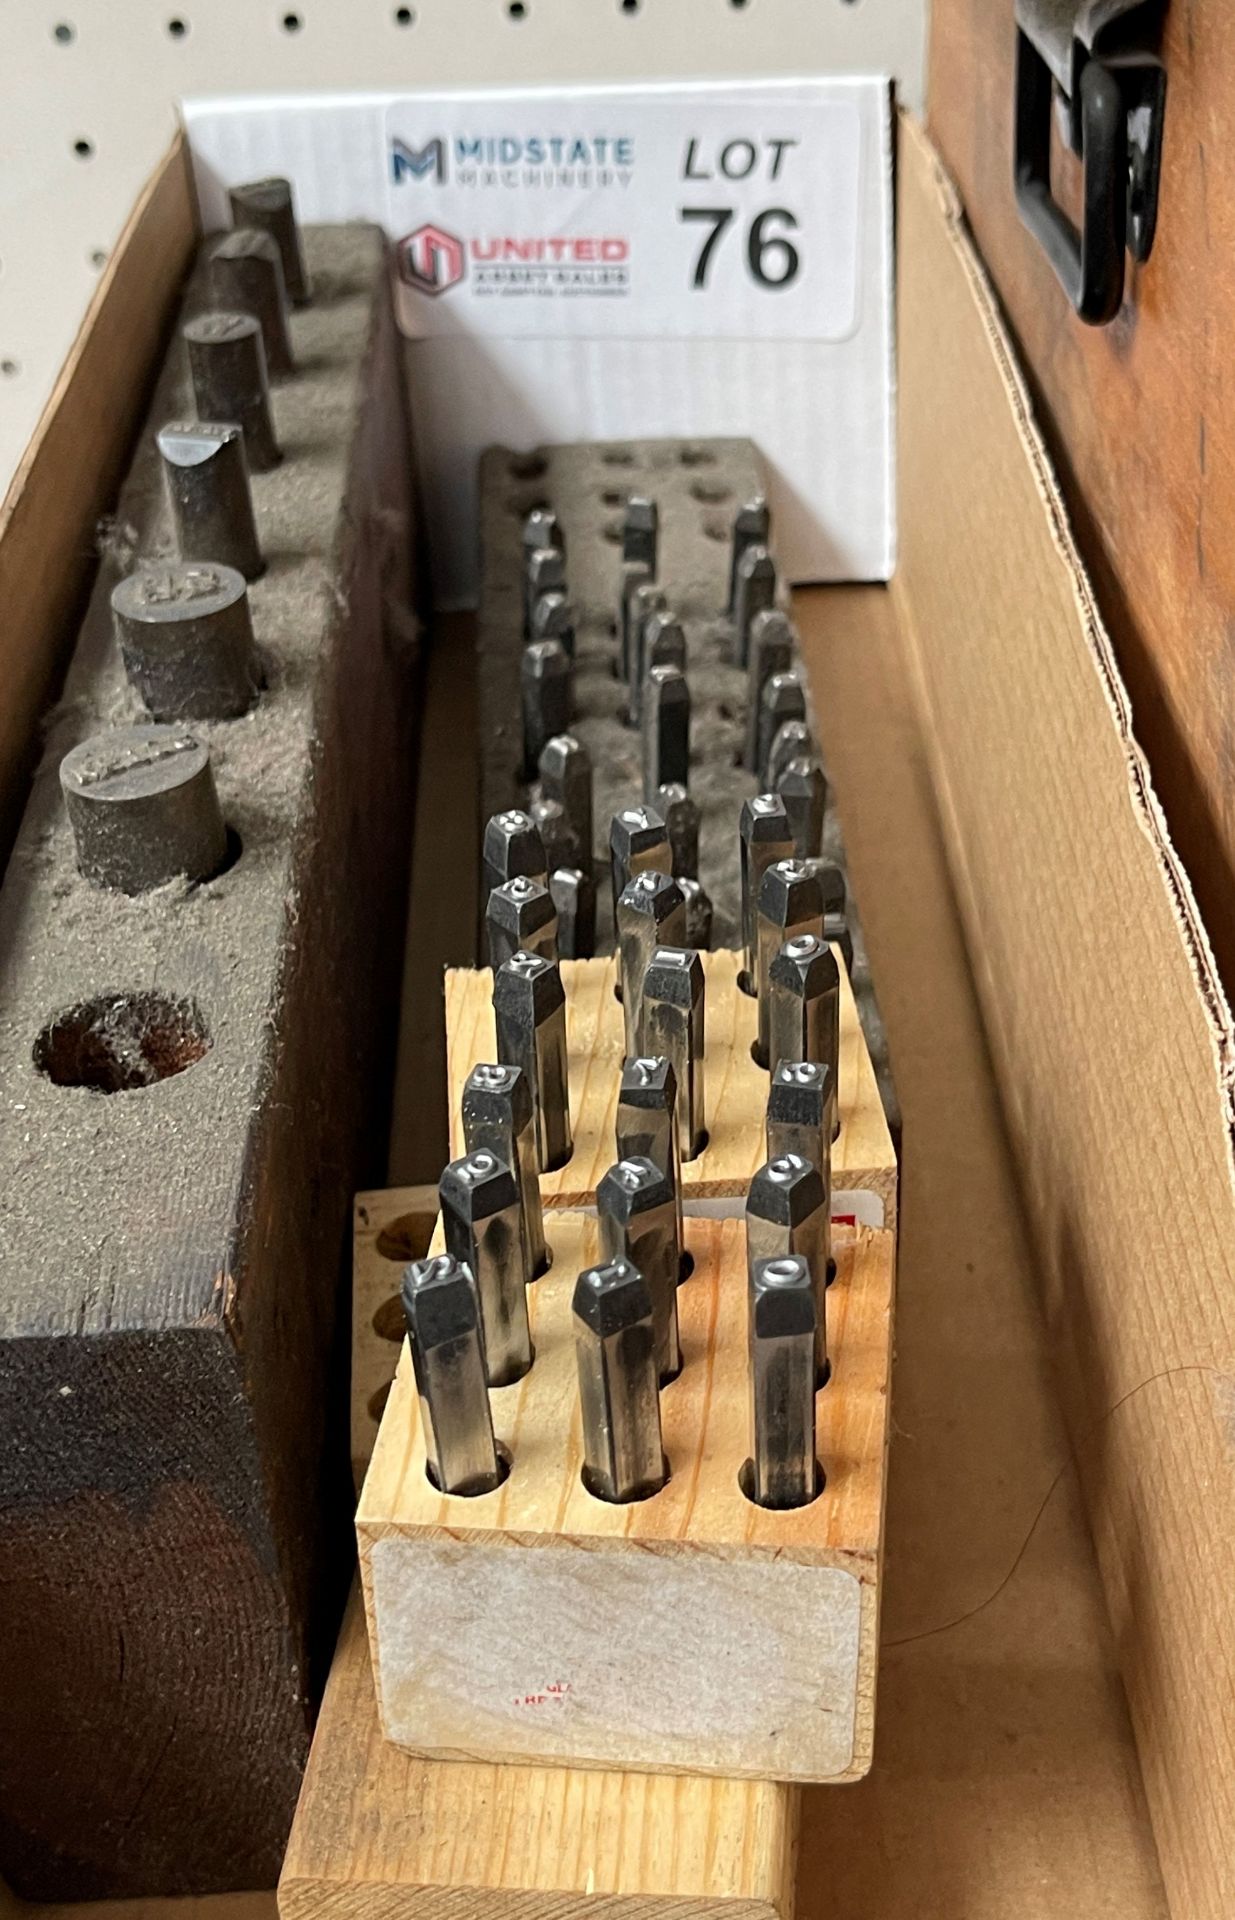 LOT - LETTER & NUMBER PUNCHES